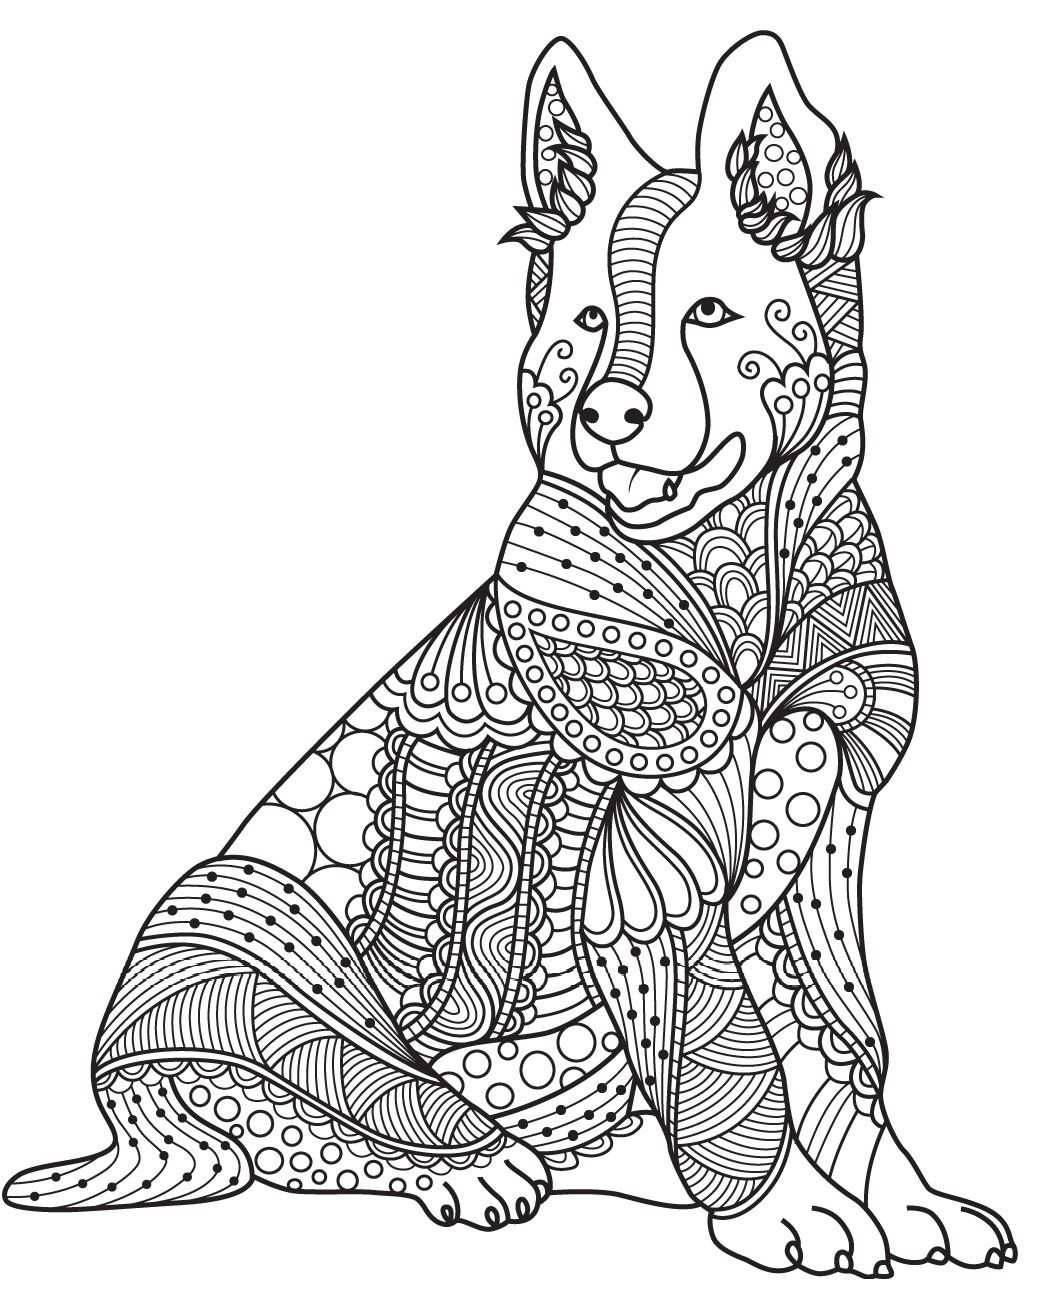 Dog Colorish Coloring Book For Adults Mandala Relax By